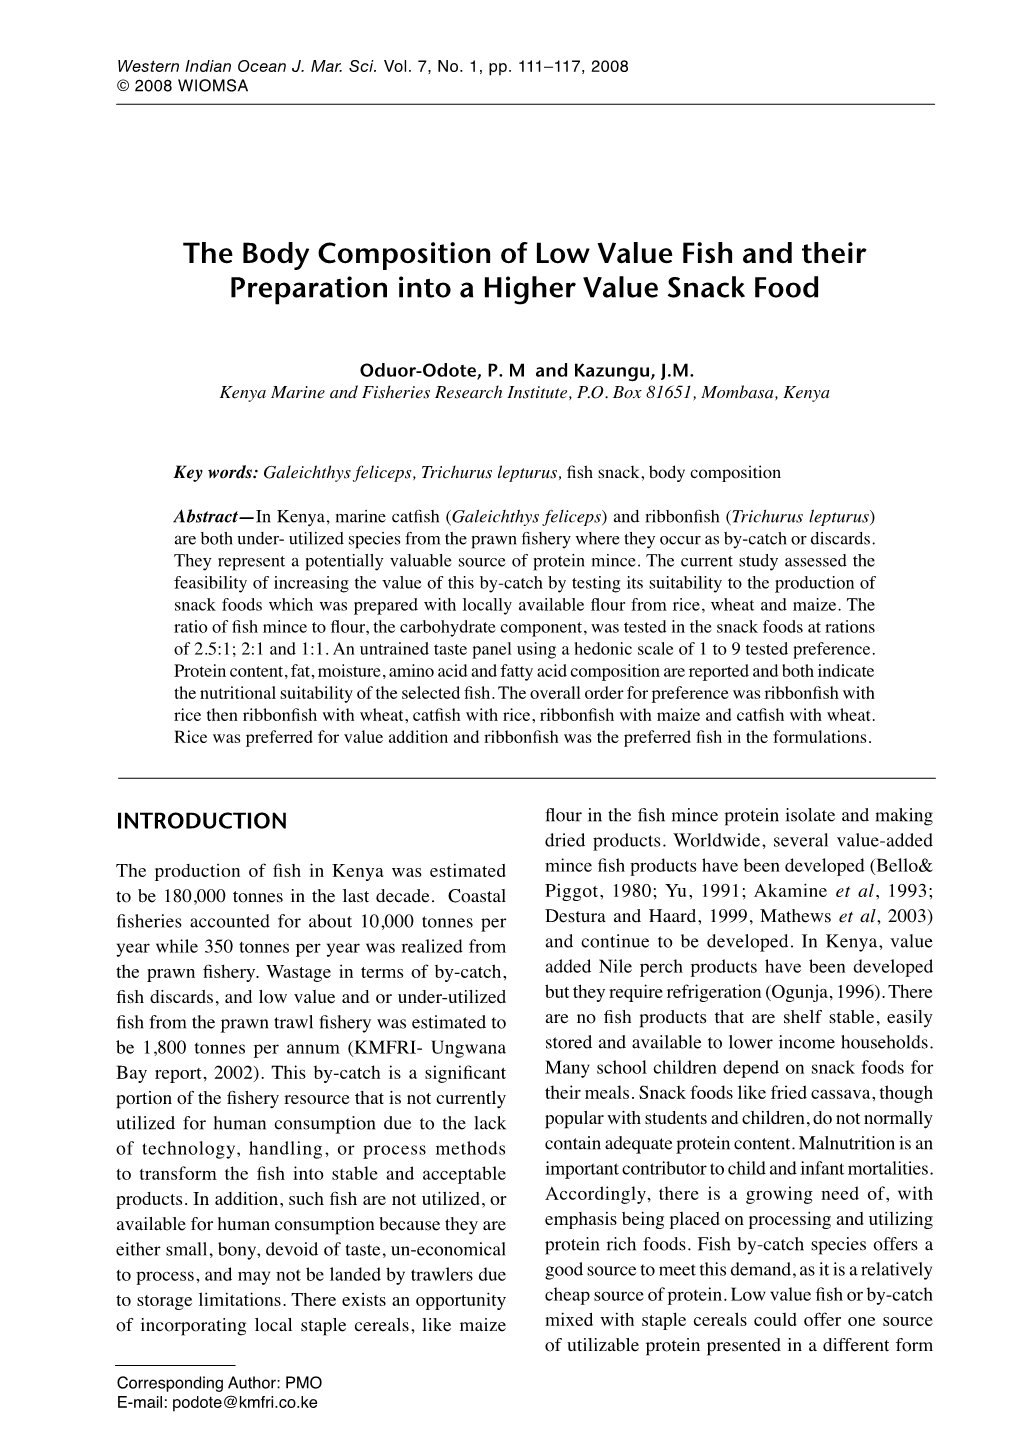 The Body Composition of Low Value Fish and Their Preparation Into a Higher Value Snack Food